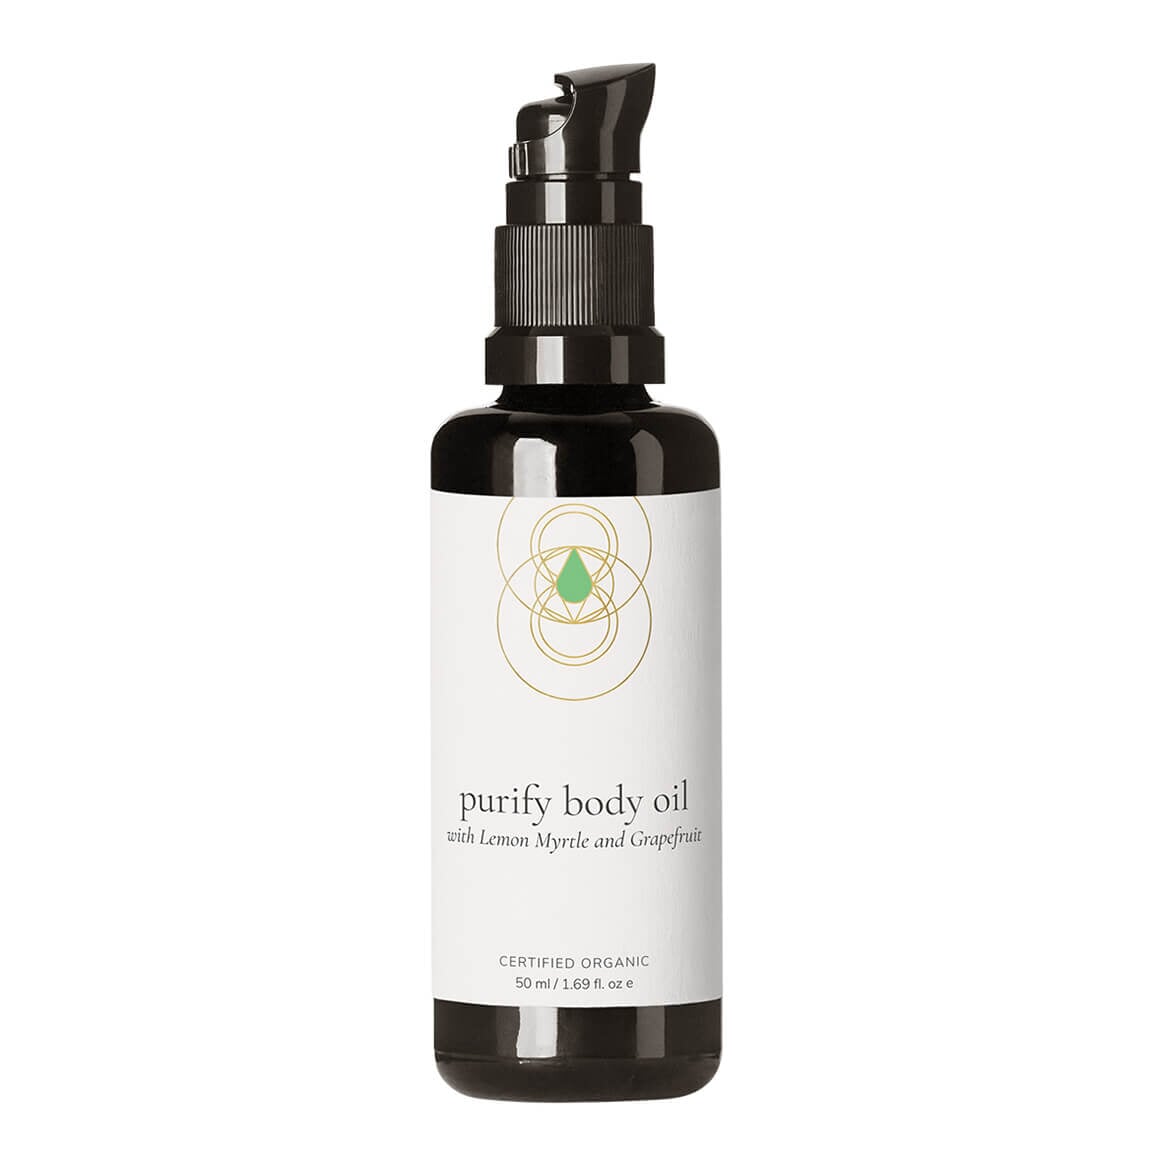 Purify Body Oil Other Synthesis Organics 